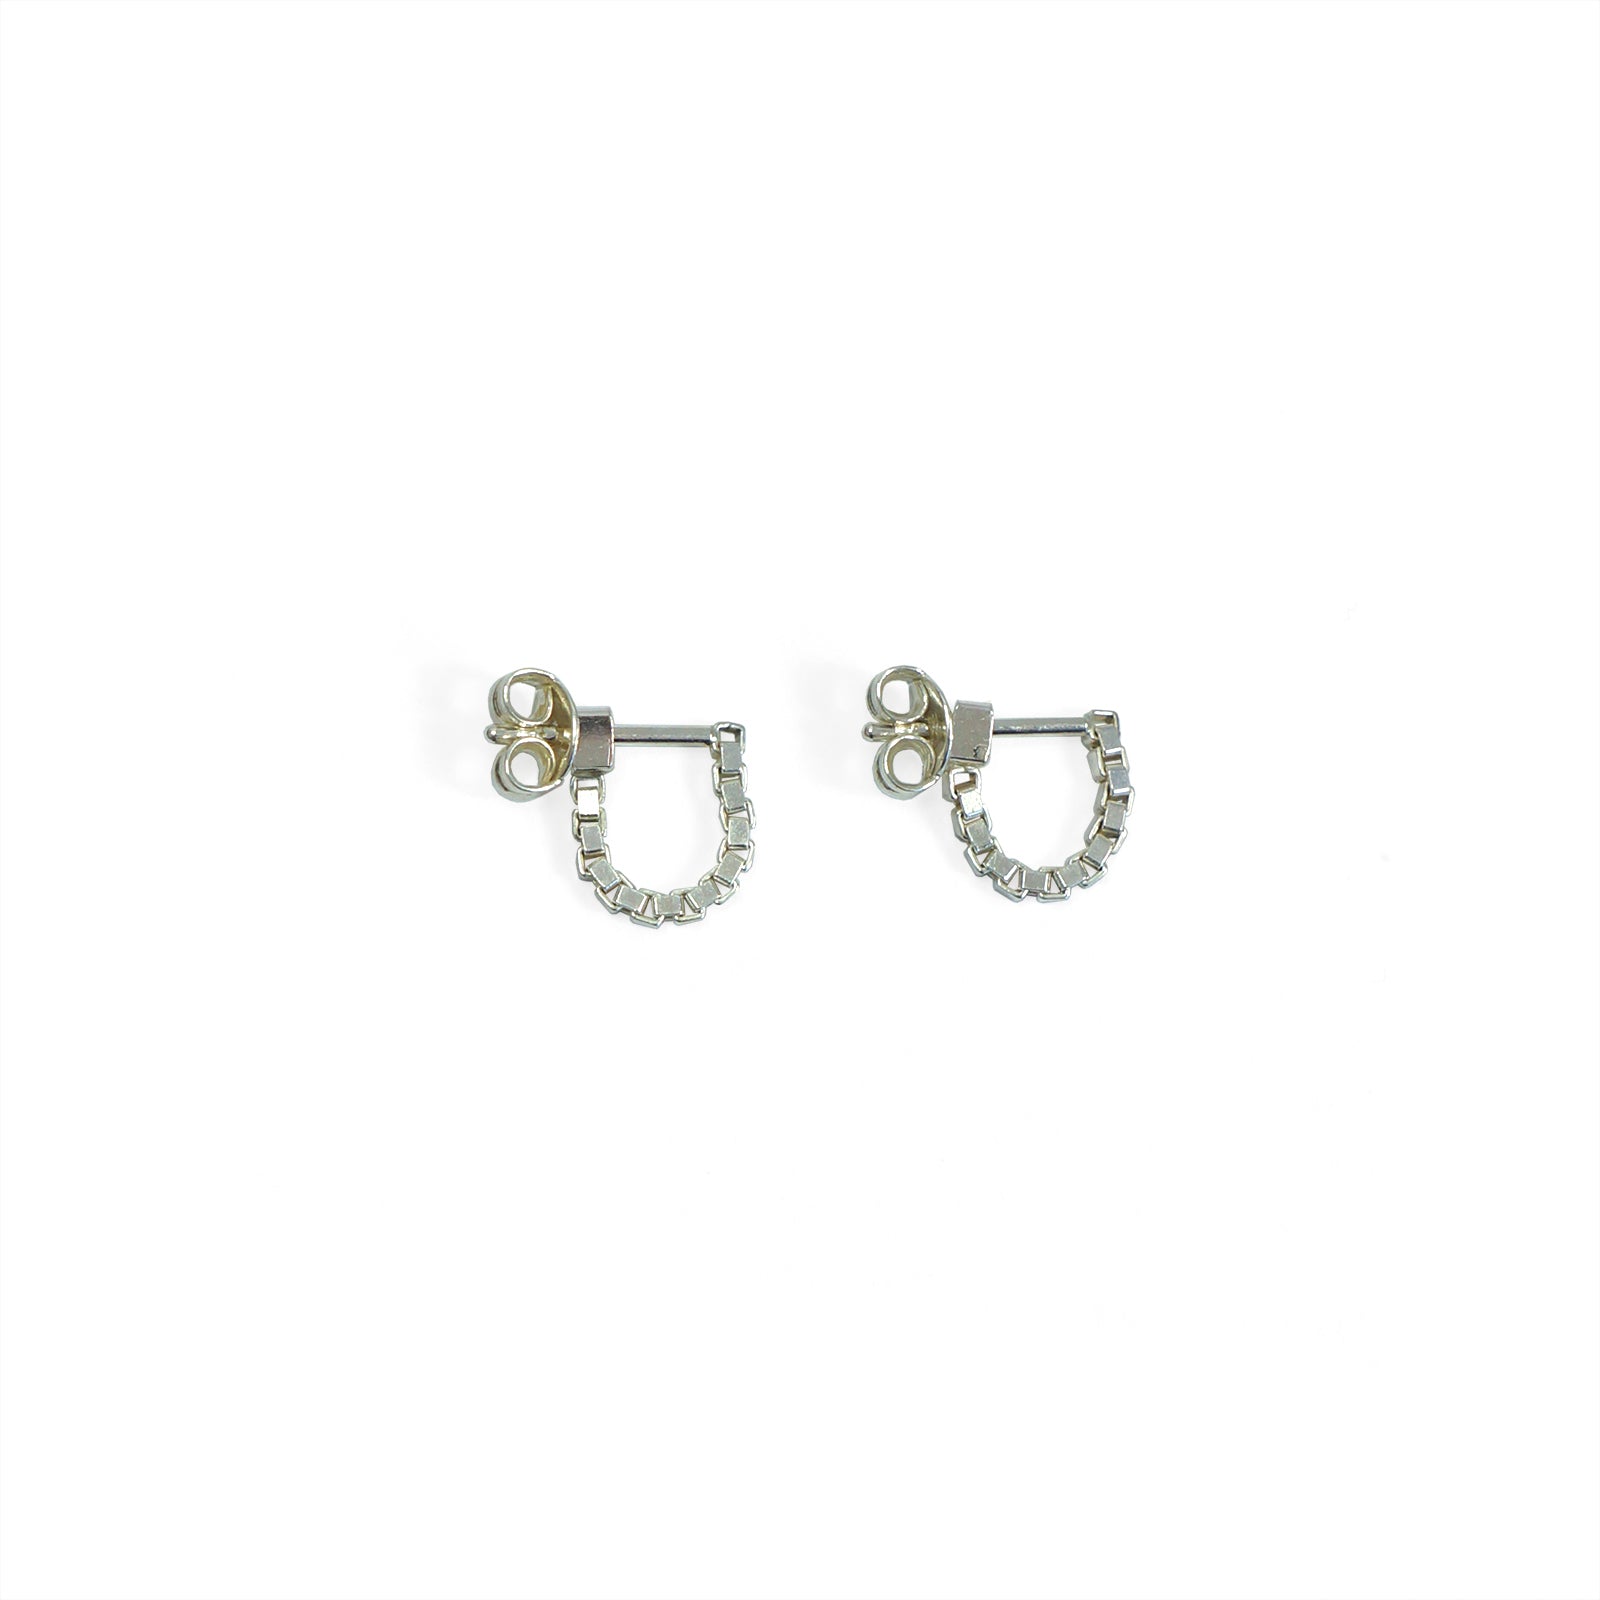 Martine Viergever earrings Round Simple sterling silver